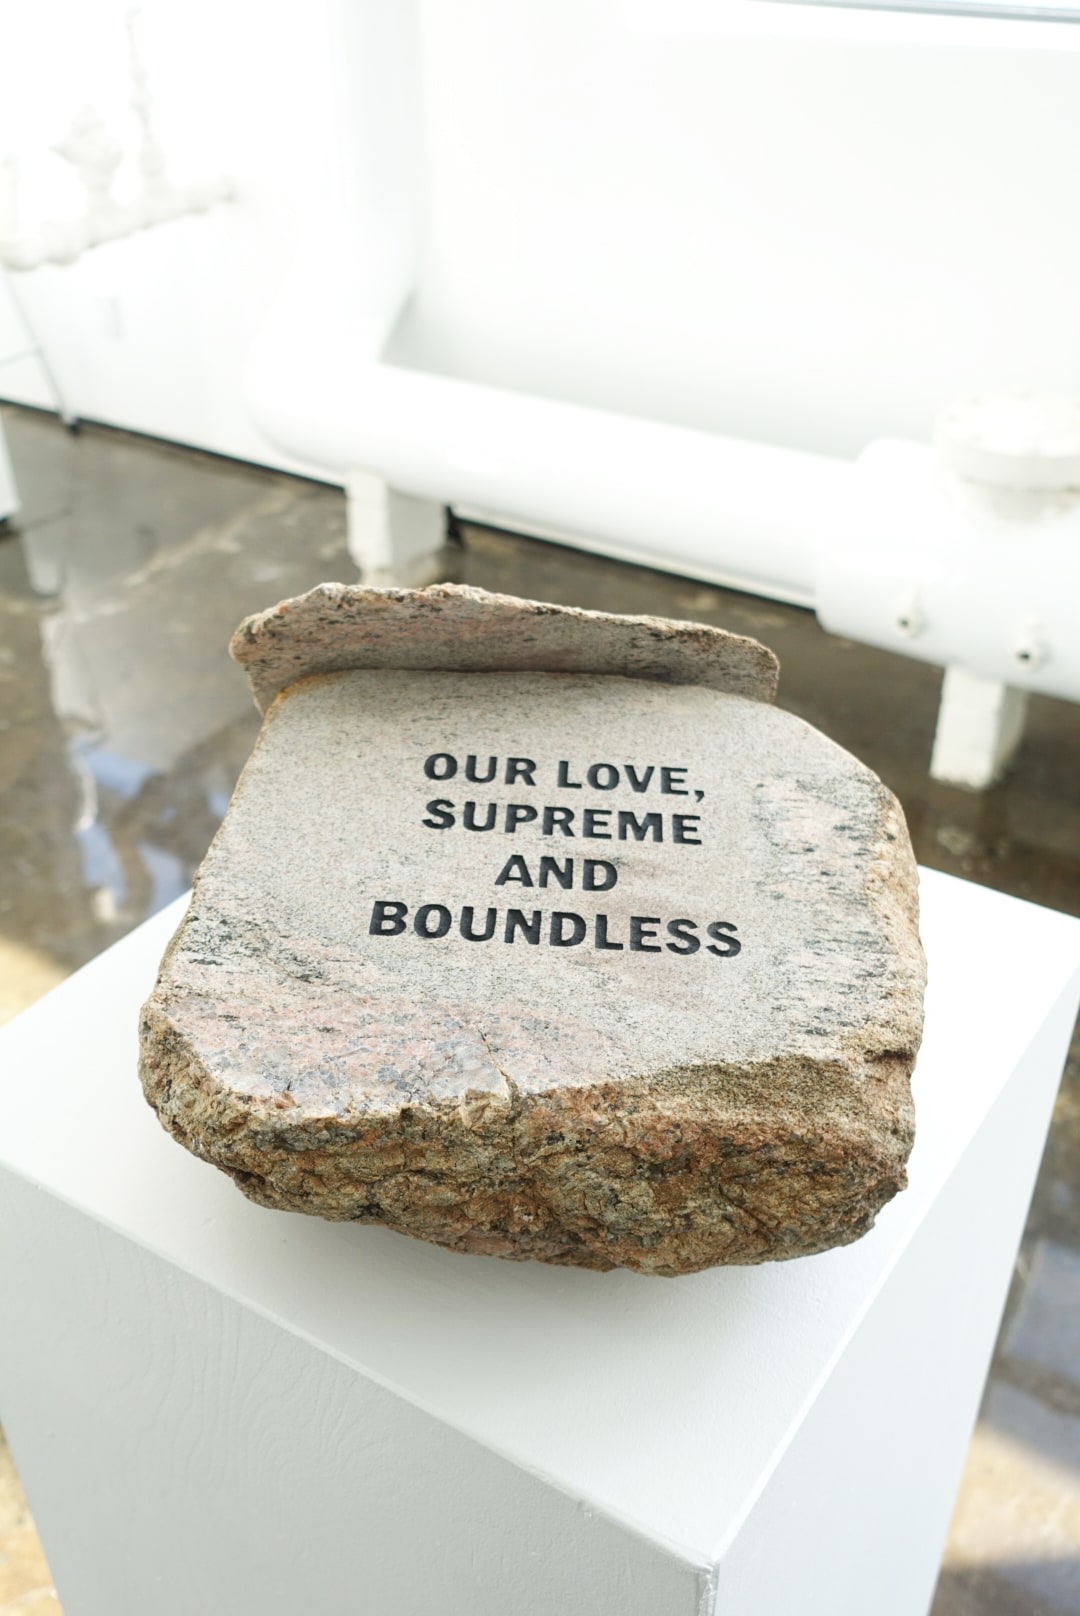 MICHAEL VICKERS | MONUMENT IV (LOVE)&nbsp;| ENGRAVED AND PAINTED STONE BOULDER | 5,5 X 13 X 12 INCHES&nbsp;| 2017